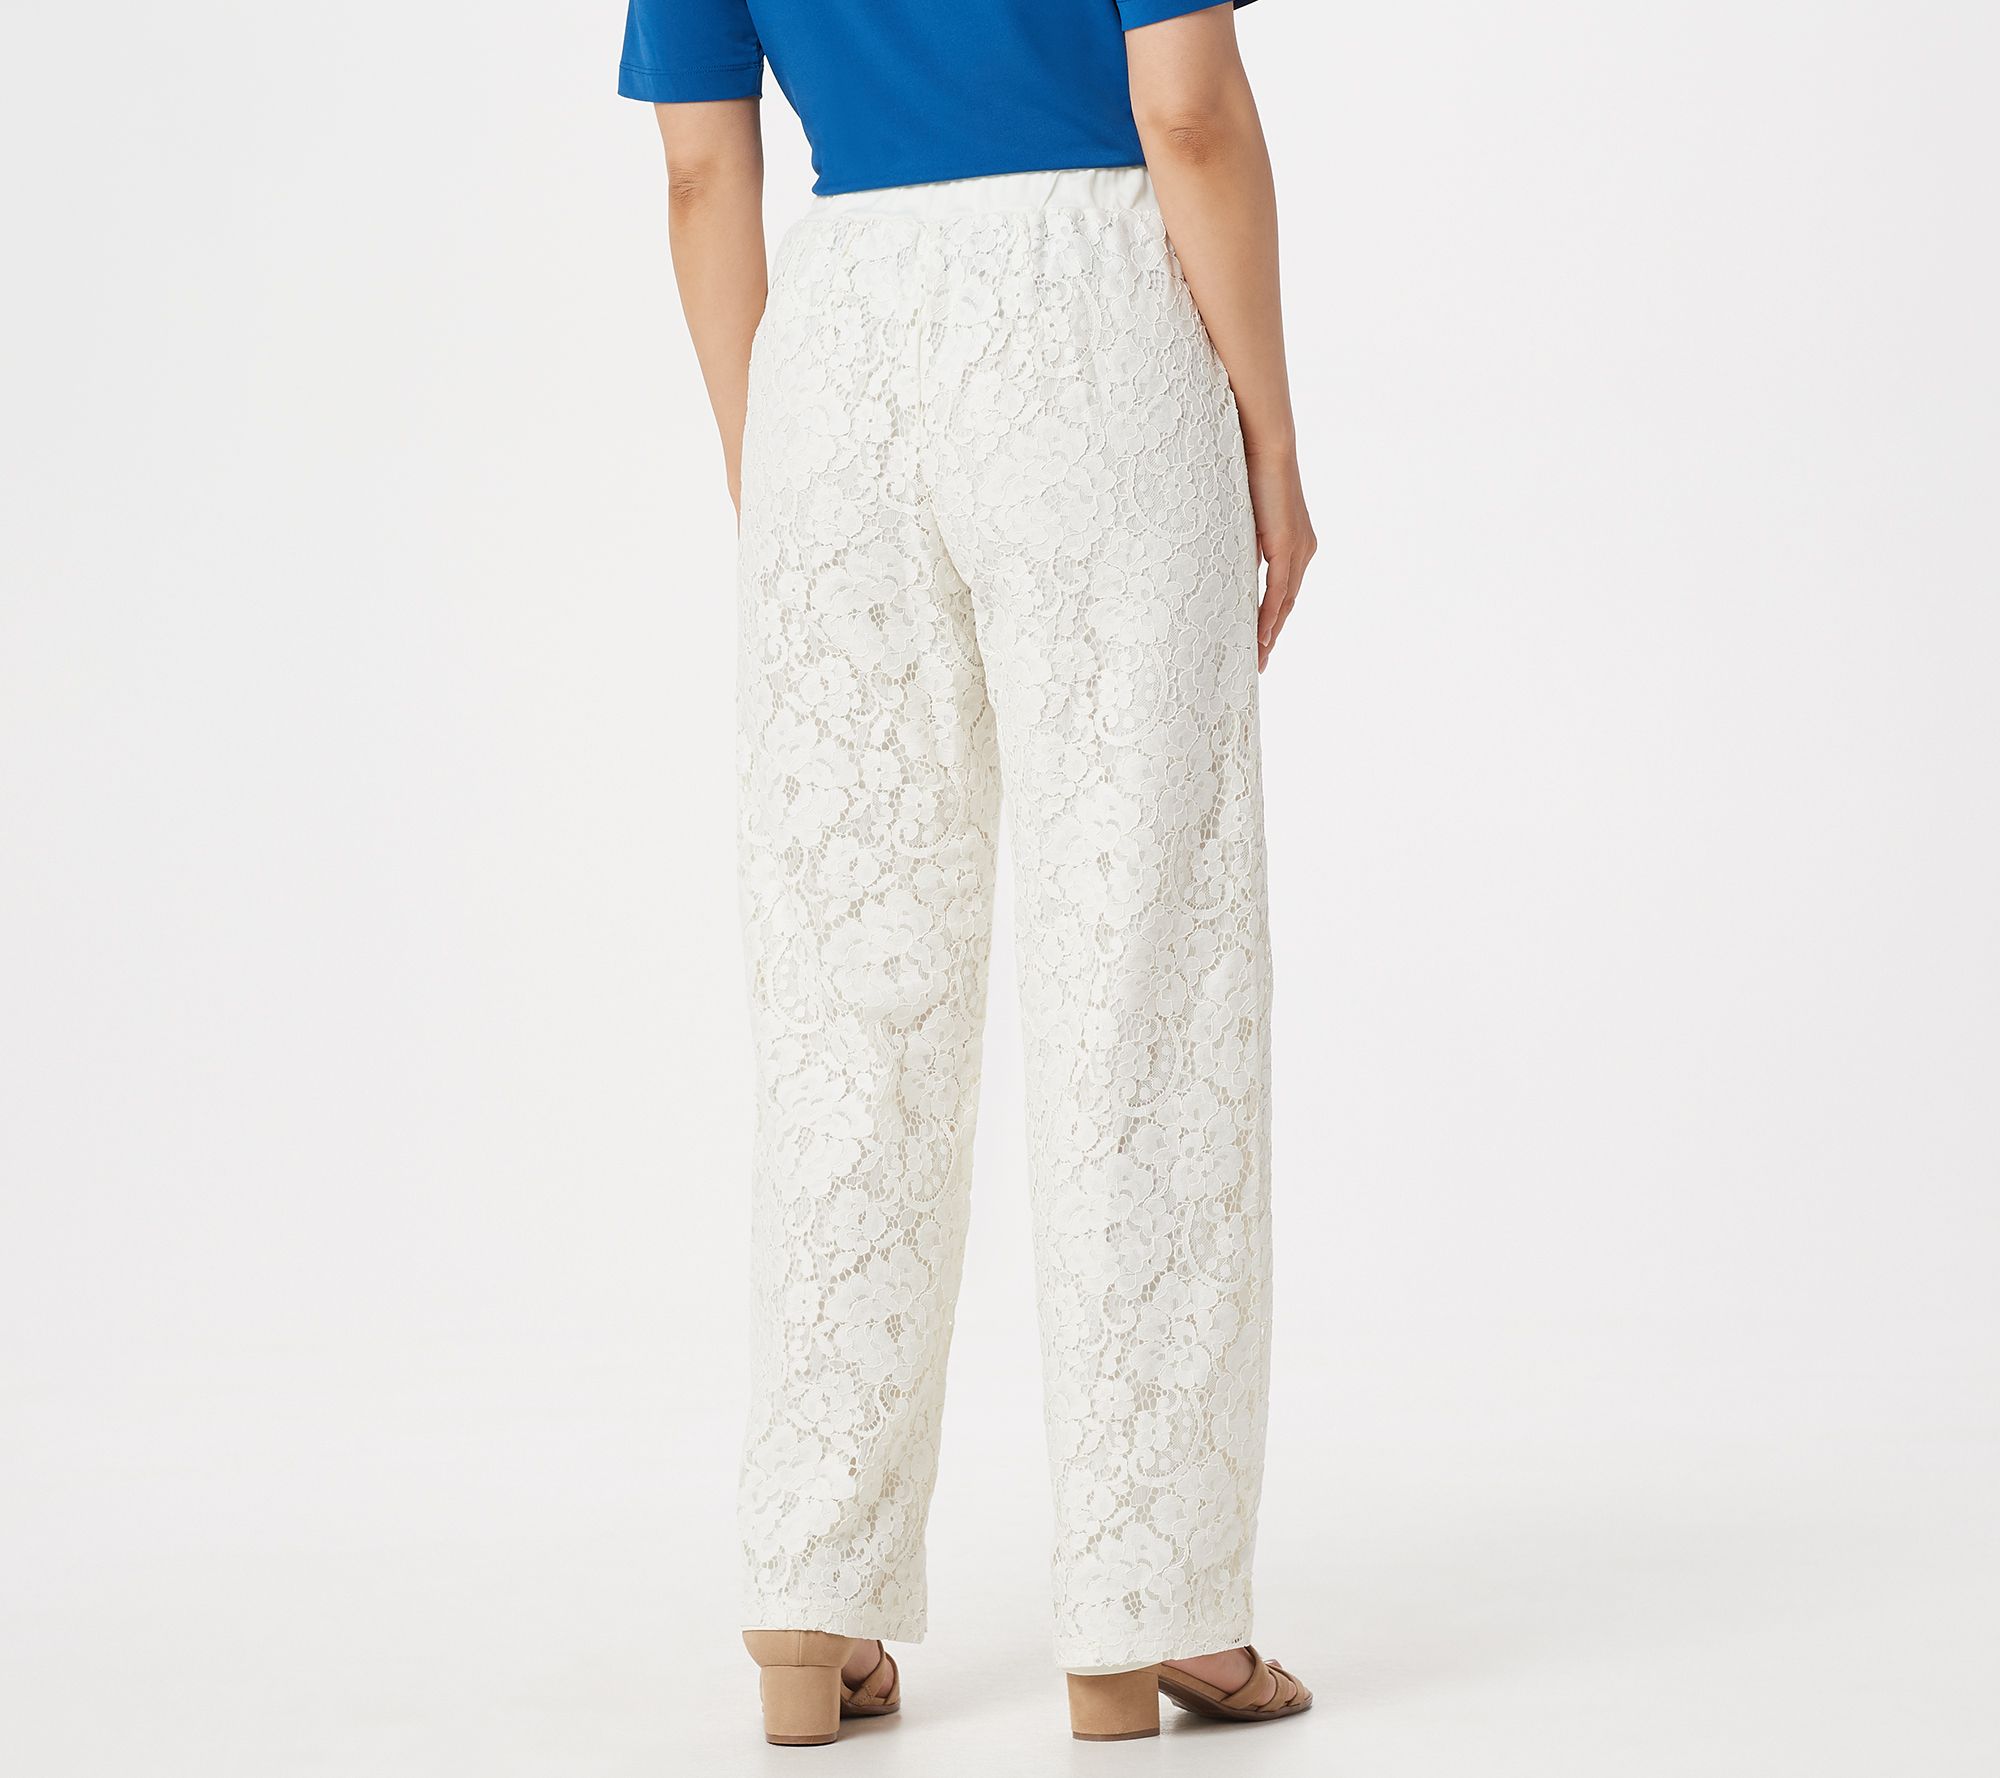 Linea by Louis Dell'Olio Pull-On Lace Full-Length Pants - QVC.com